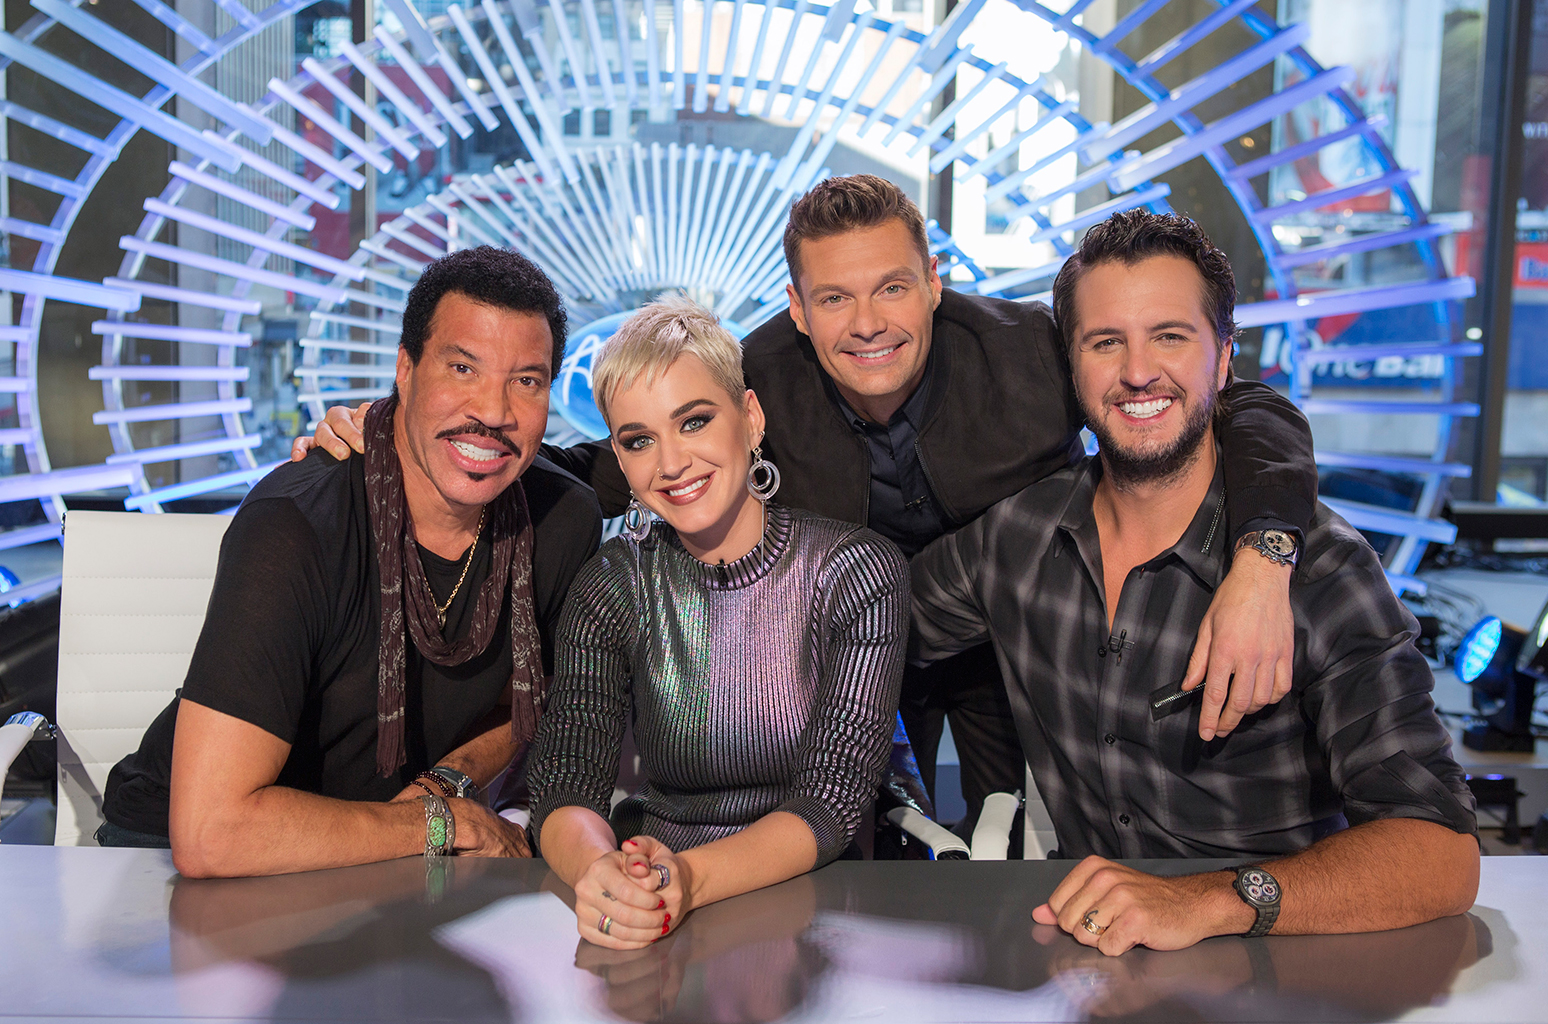 PHOTO: The cast of season 16 of "American Idol," including: Lionel Richie, Katy Perry, Ryan Seacrest and Luke Bryan. Photo courtesy of Billboard.